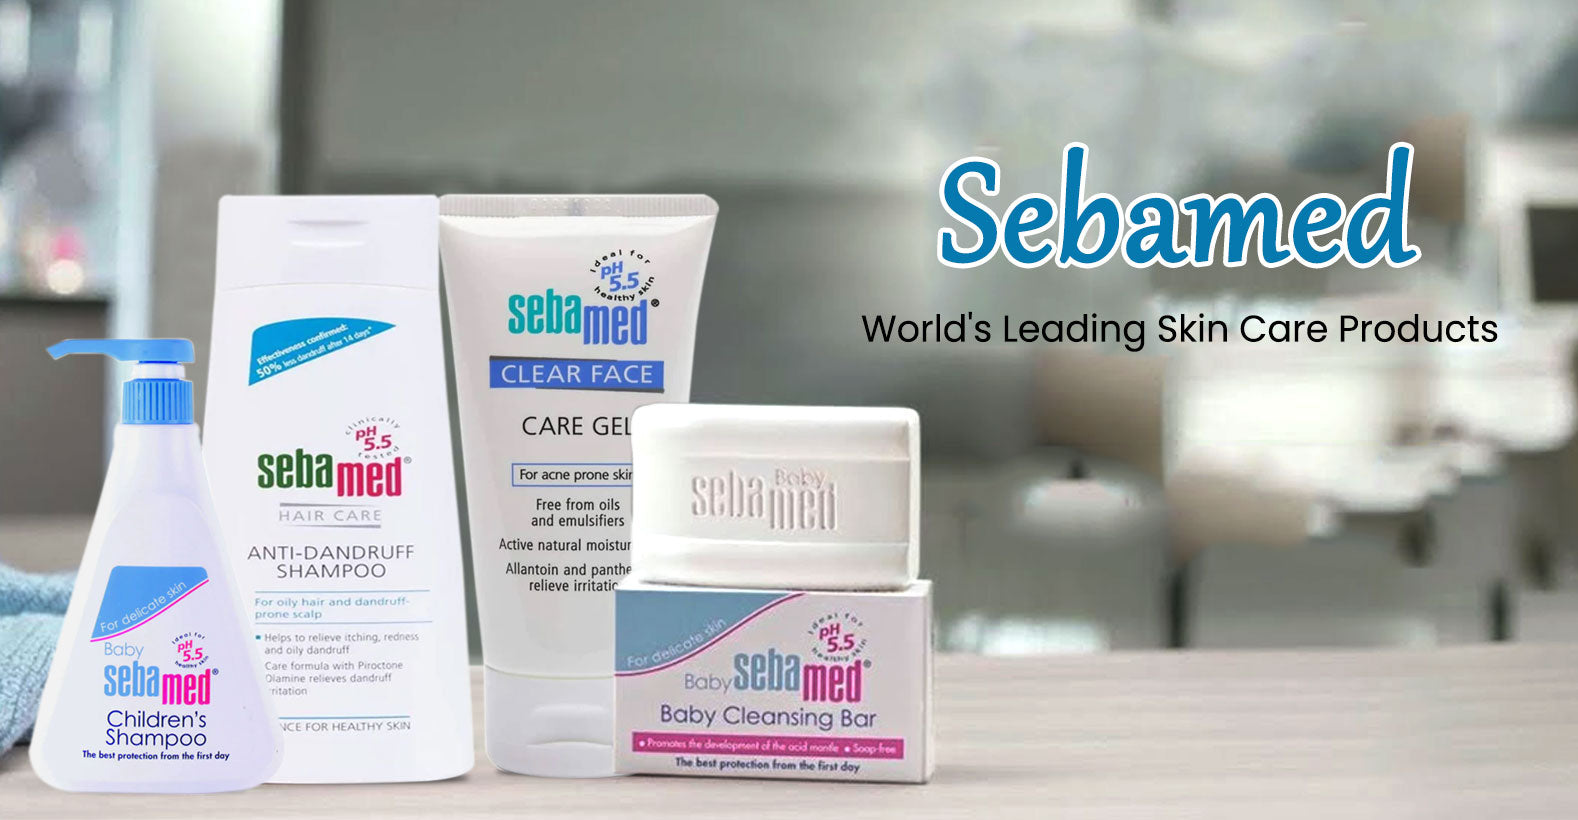 Sebamed -World's Leading Skin Care Products